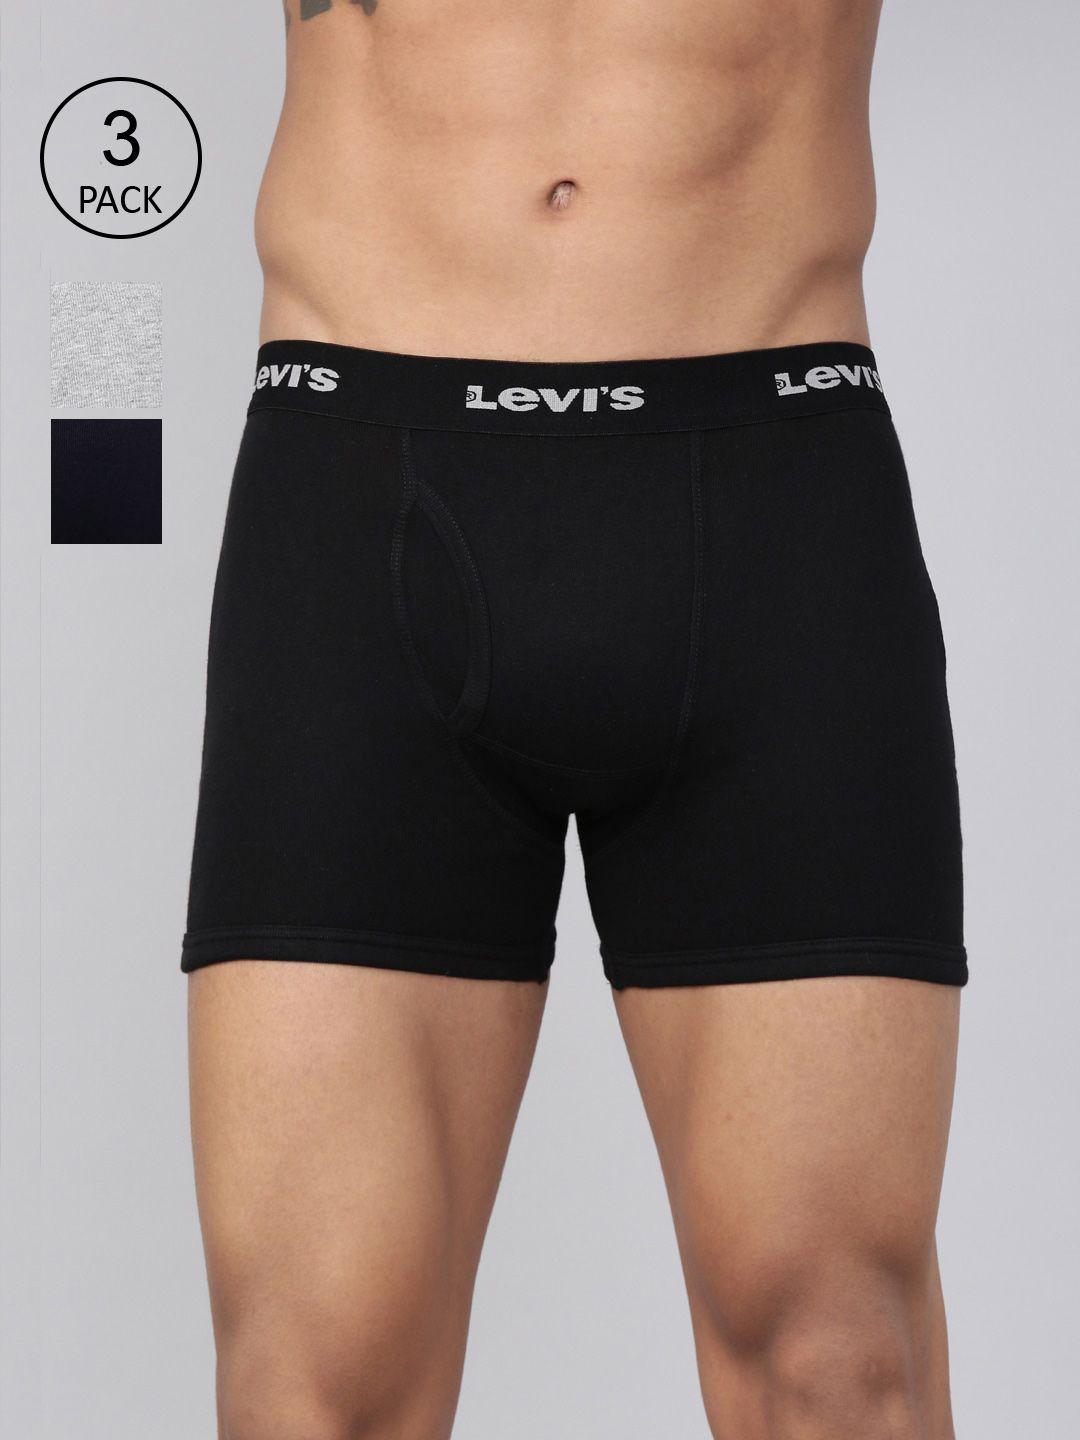 levis pack of 3 smartskin technology cotton trunks with tag free comfort #001-boxer brief